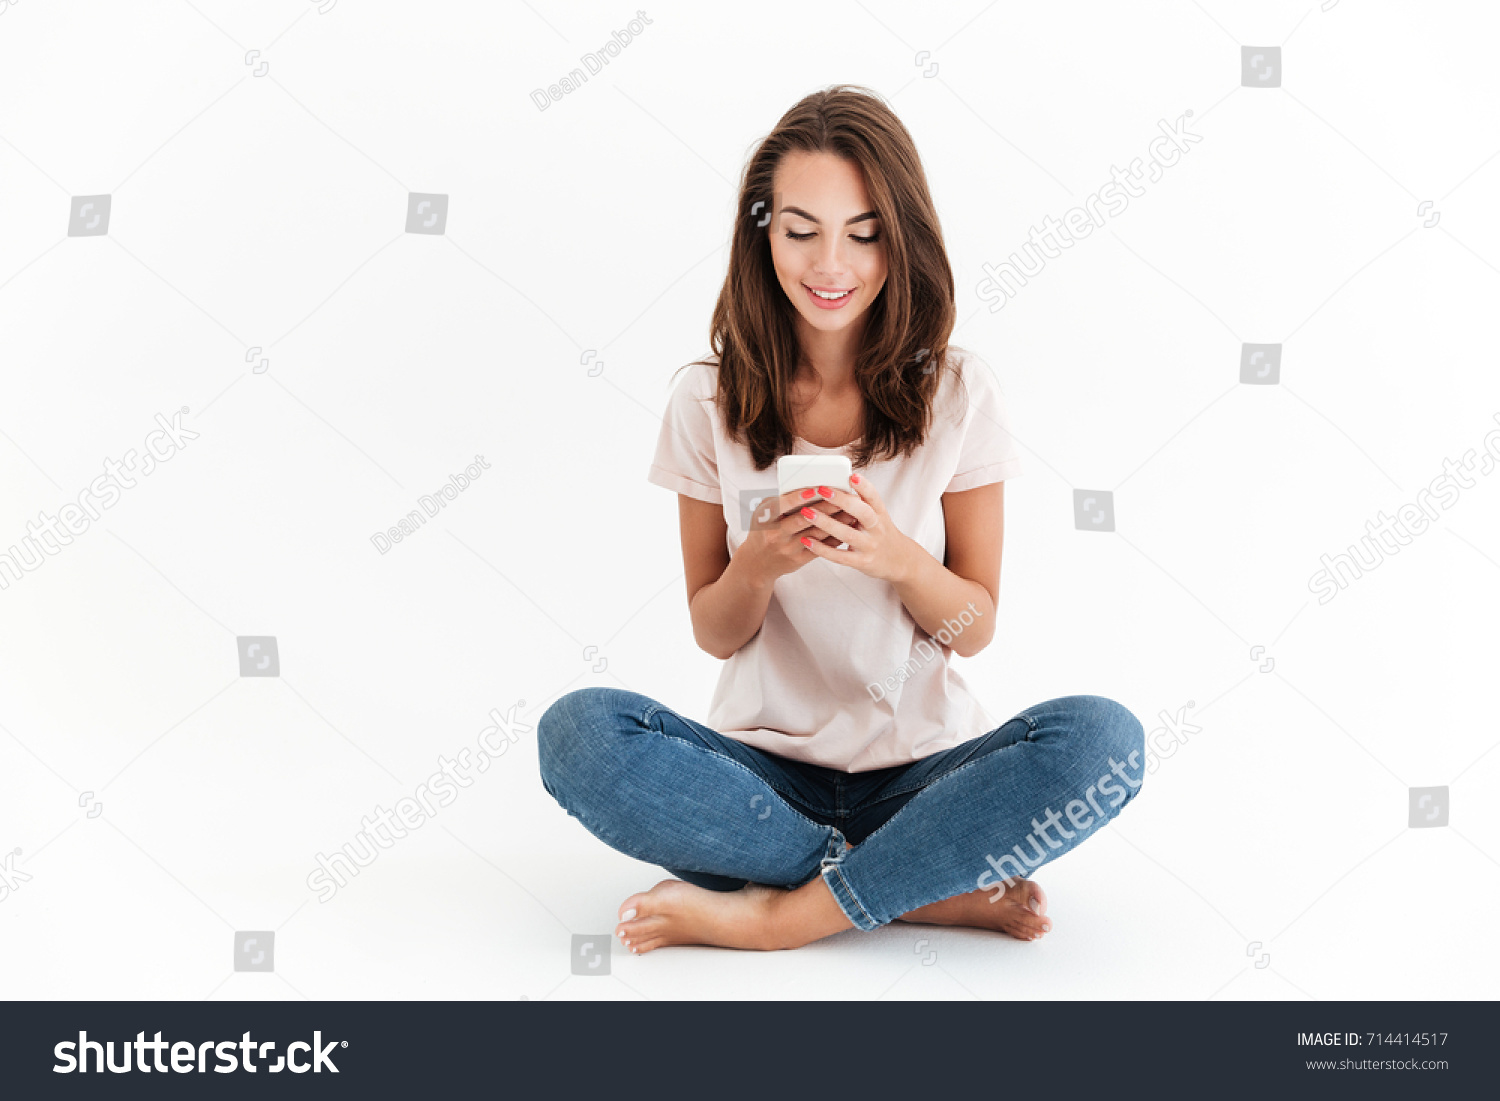 Smiling brunette woman sitting on the floor and using smartphone over white background #714414517